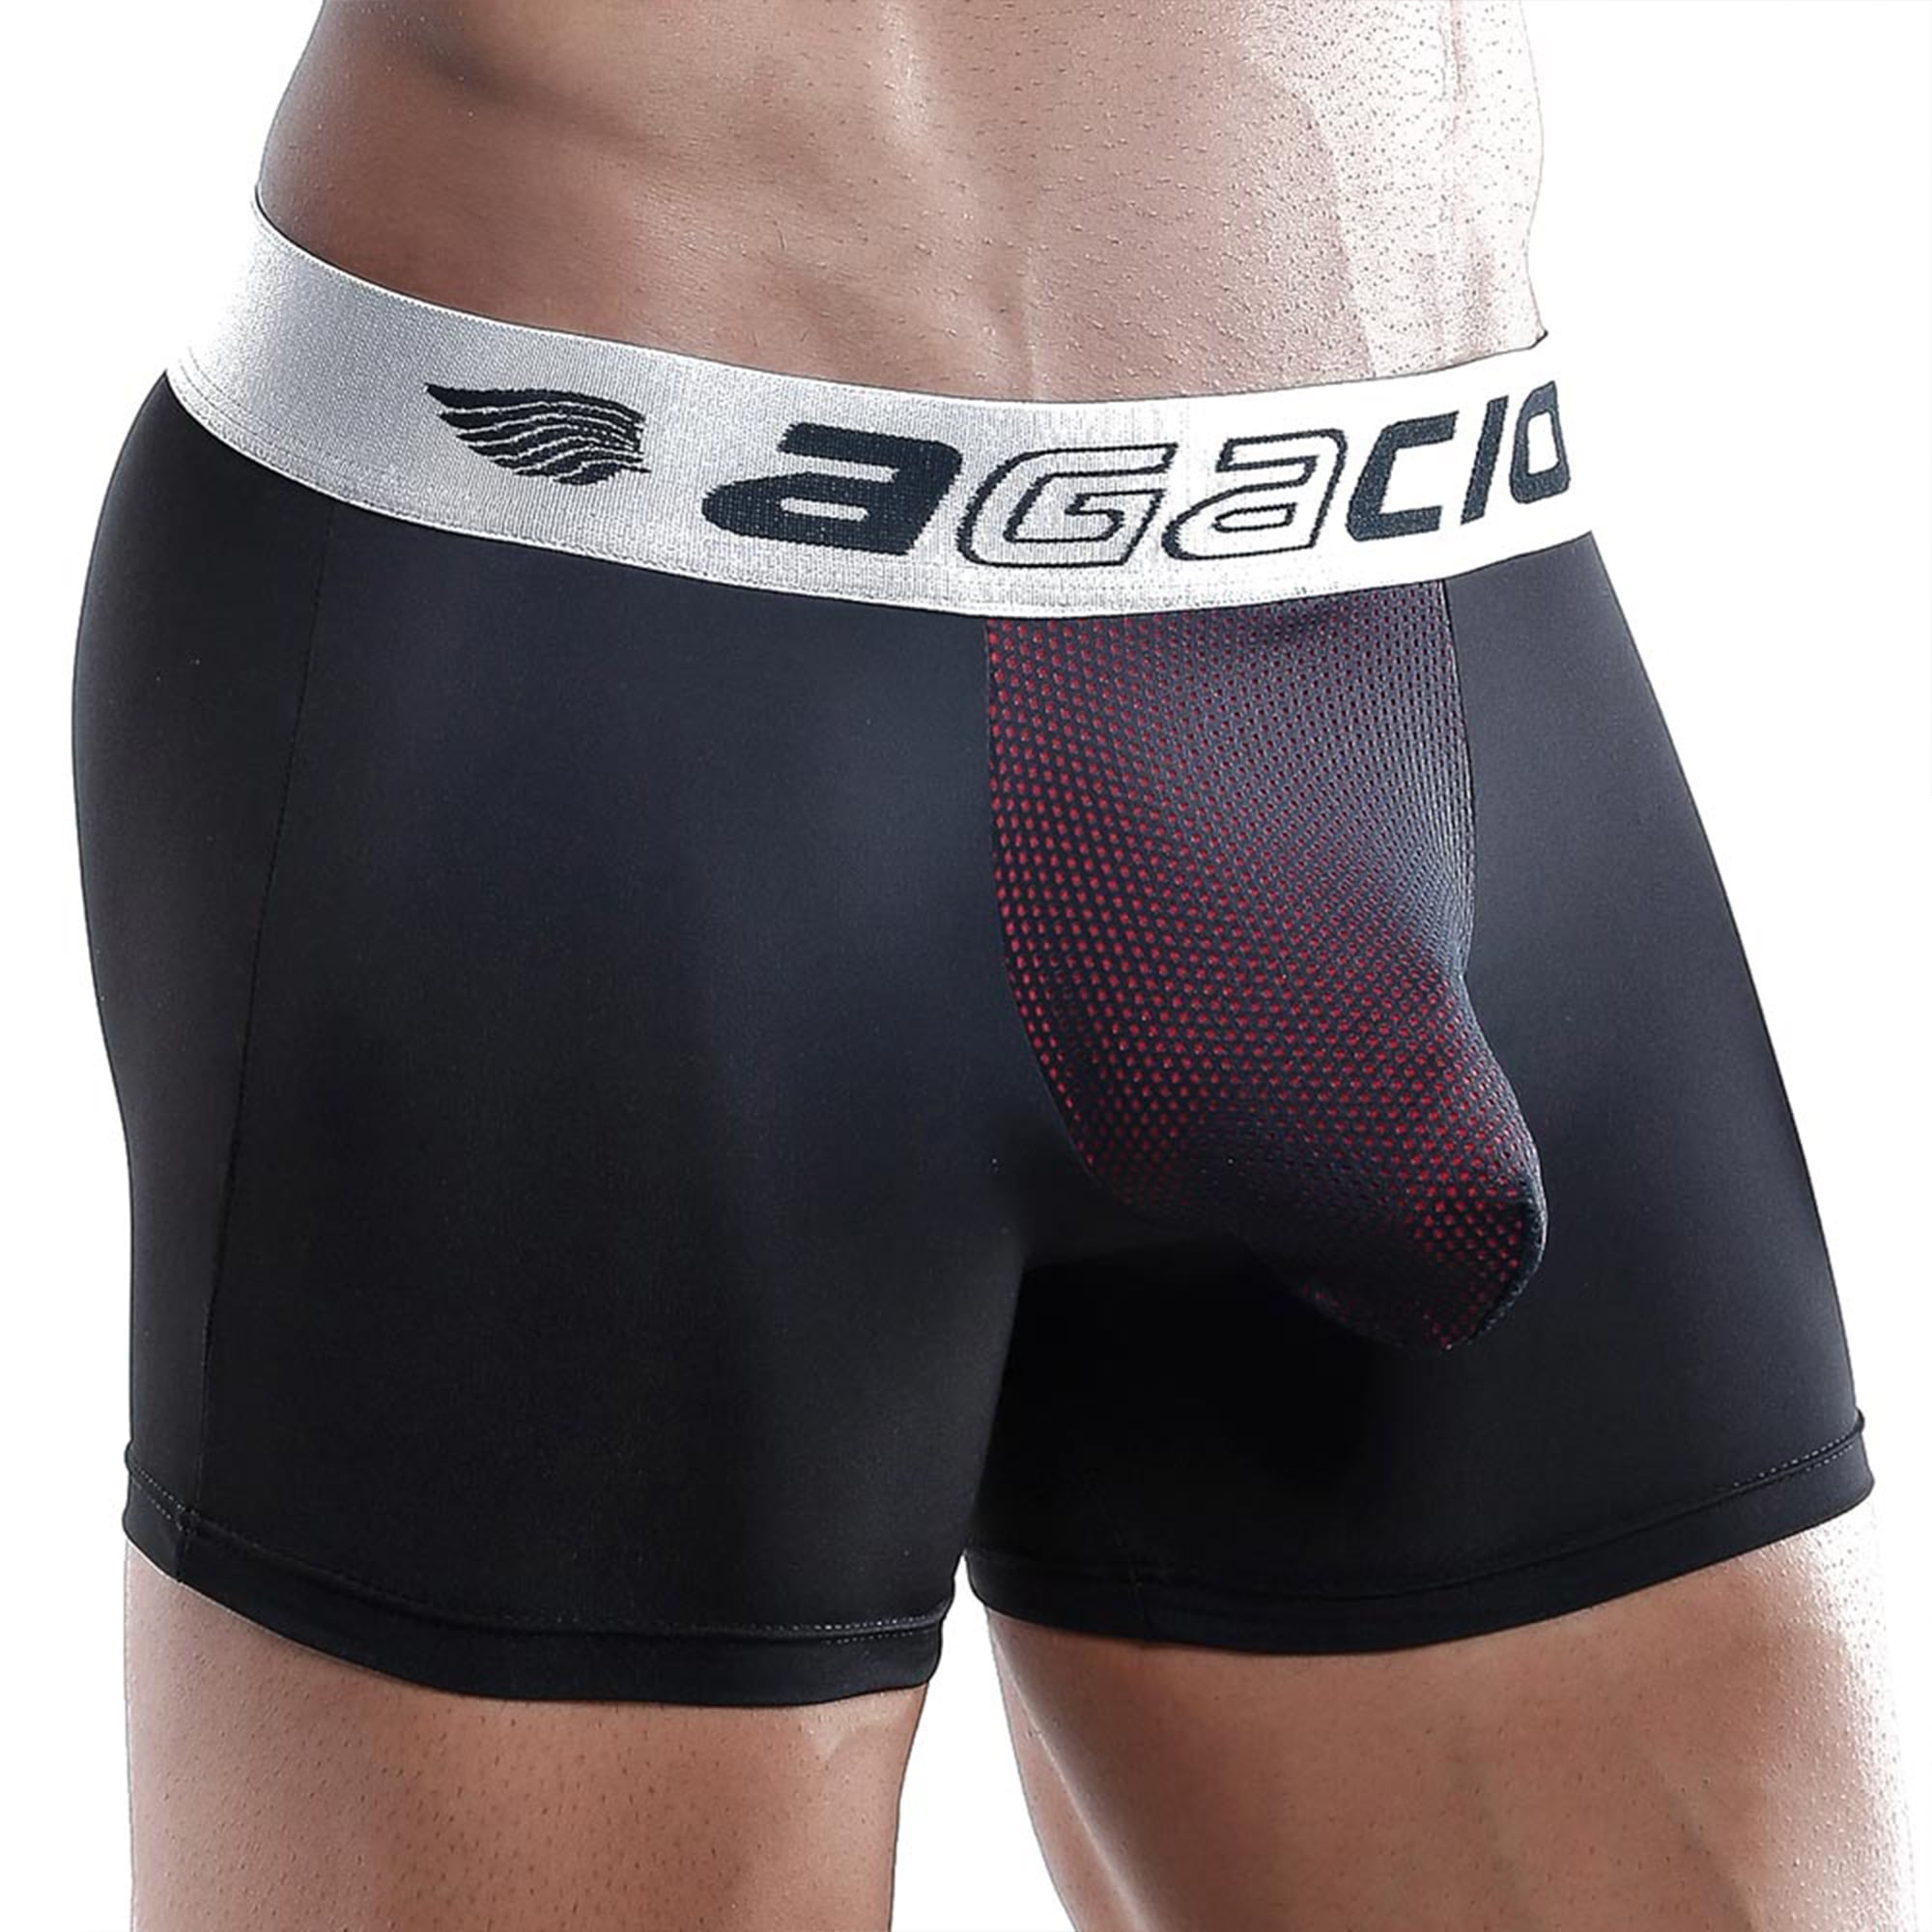 Mens Comfortable Soft Boxer Trunk Mesh Pouch Enhancing Tight Shorts Underwear 